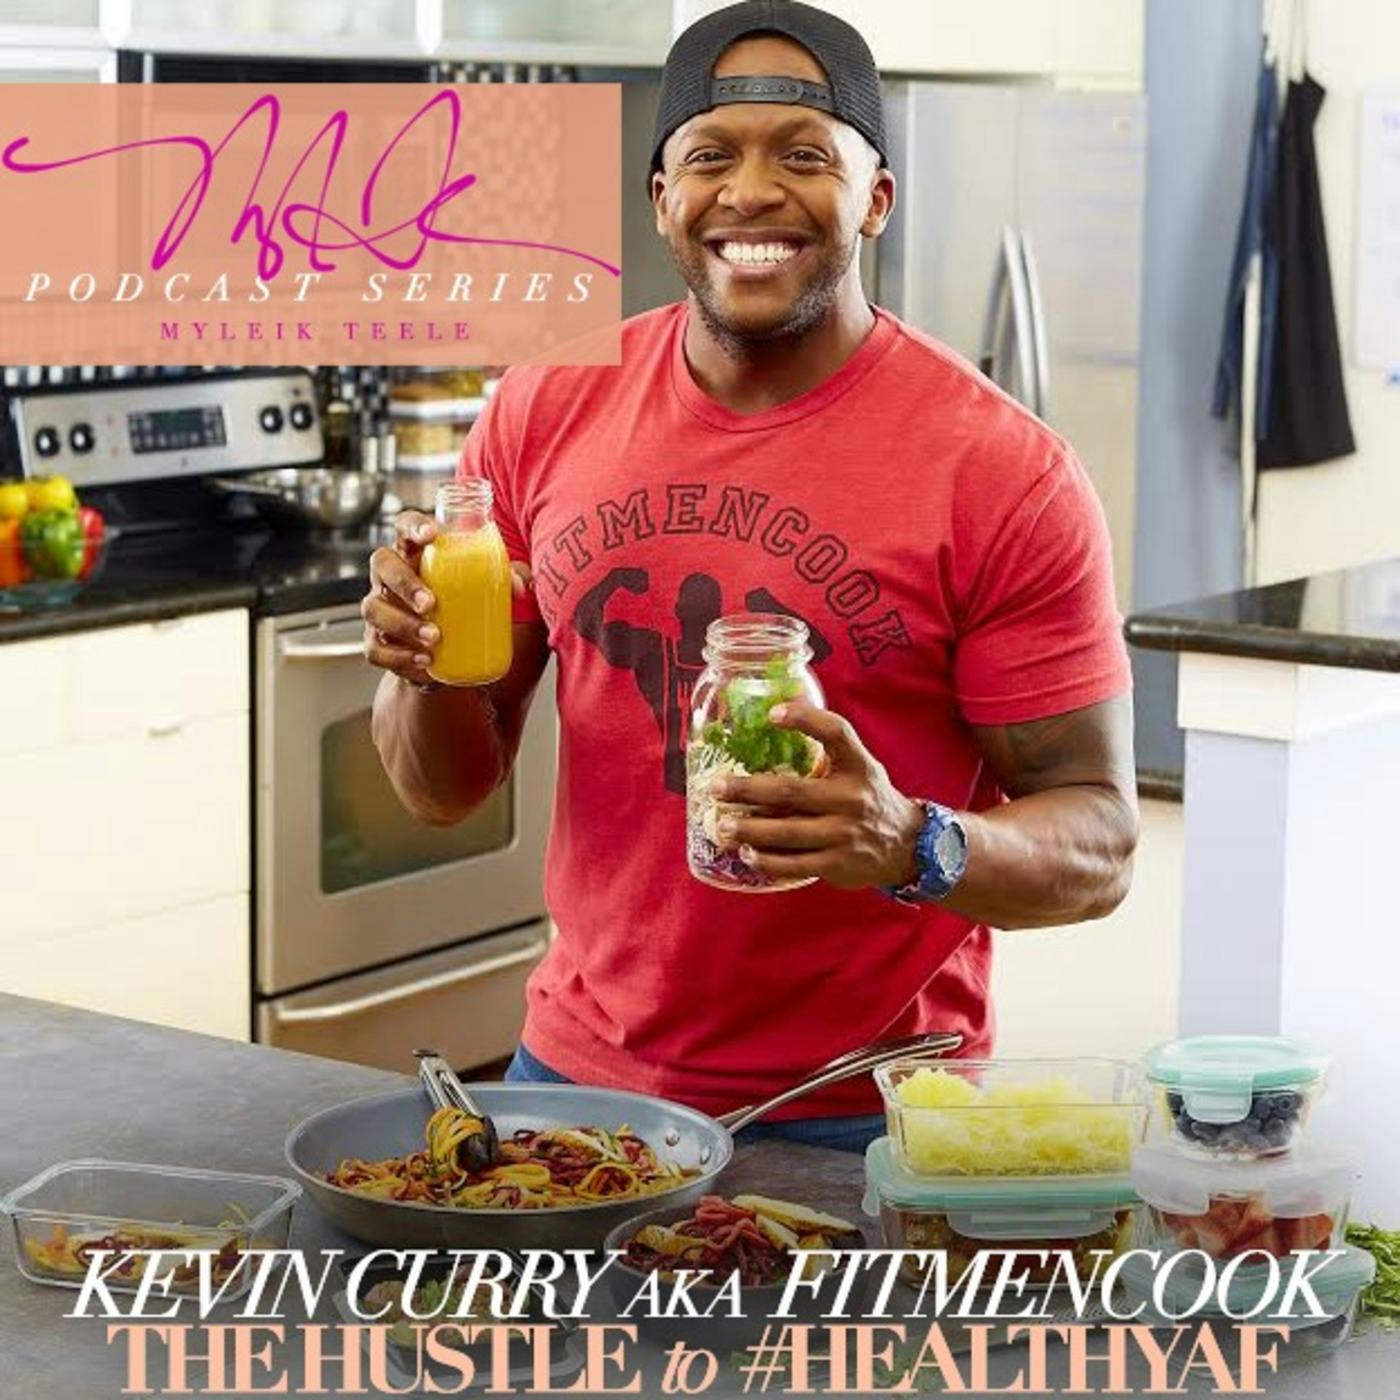 Thumbnail for "152: Hustle to #HealthyAF: Kevin Curry of FitMenCook".